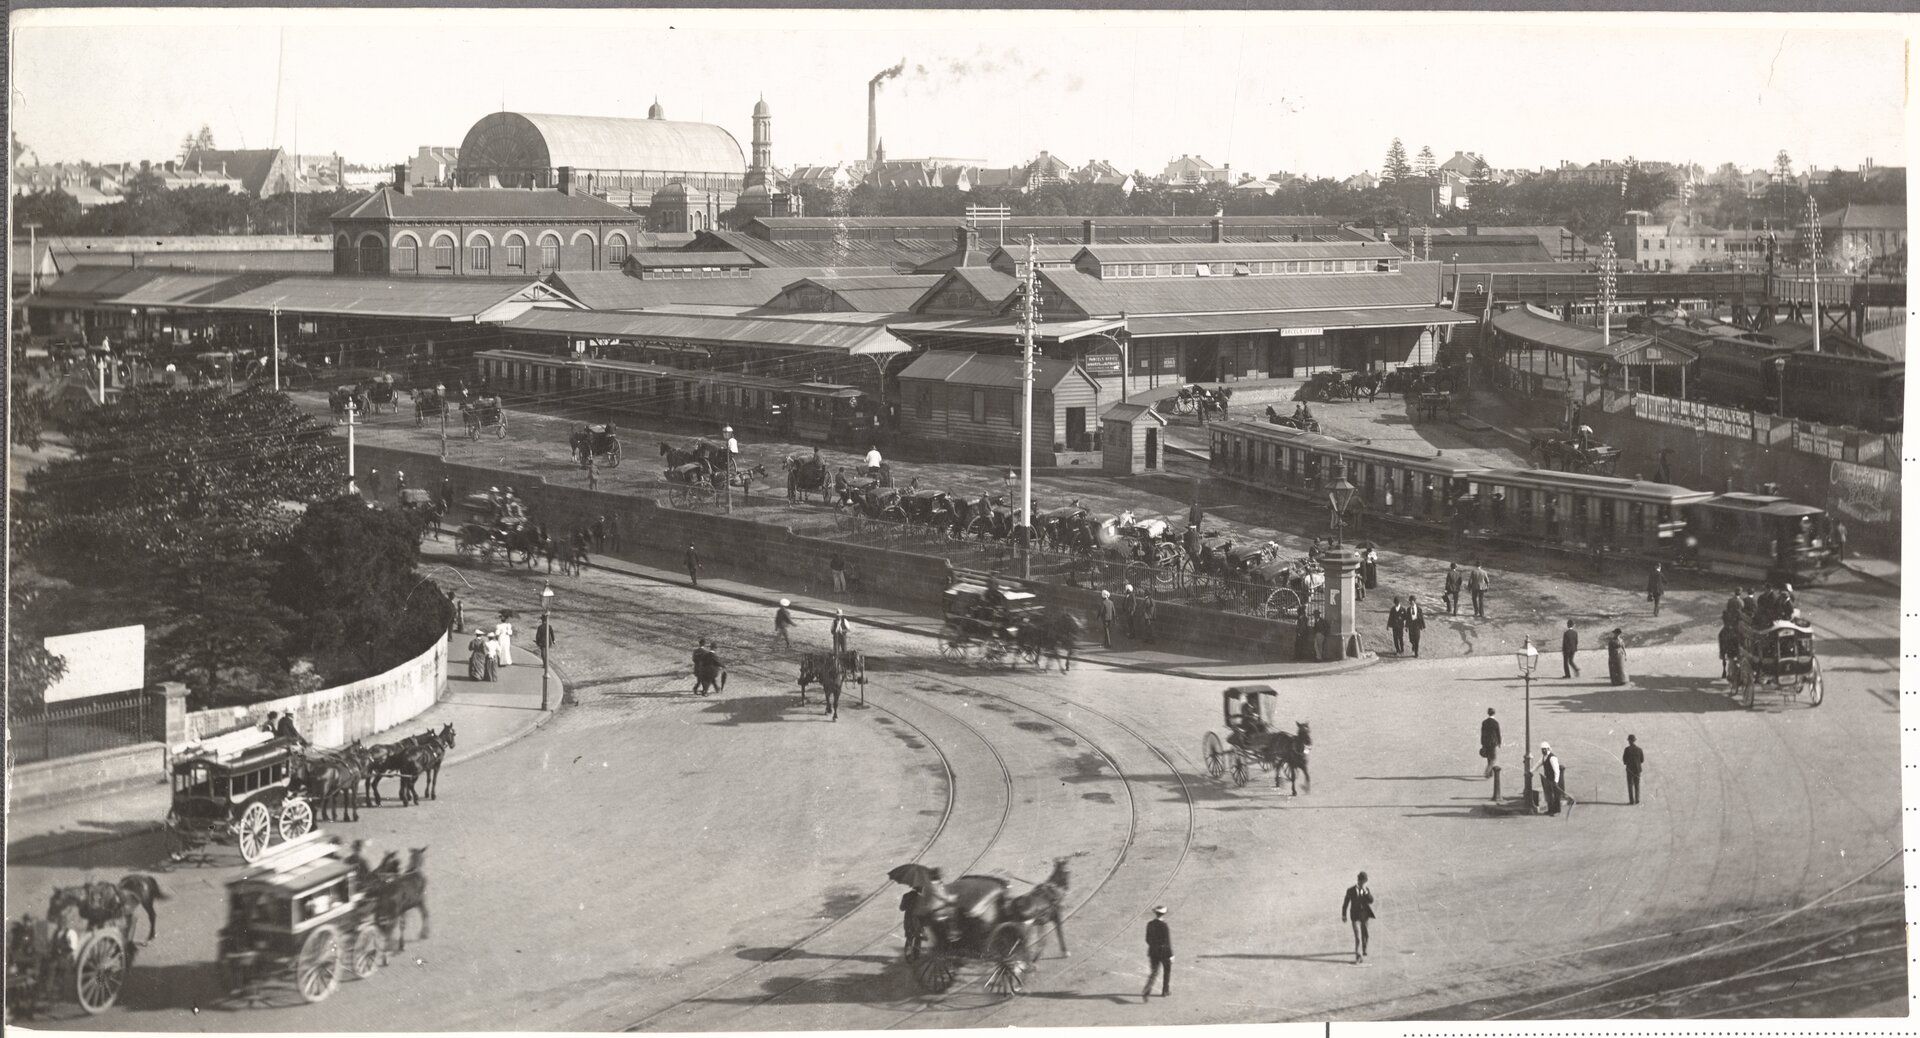 Sydney traffic scene 1900 with horses and carts, pedestrians and the Sydney Railway Station in the background